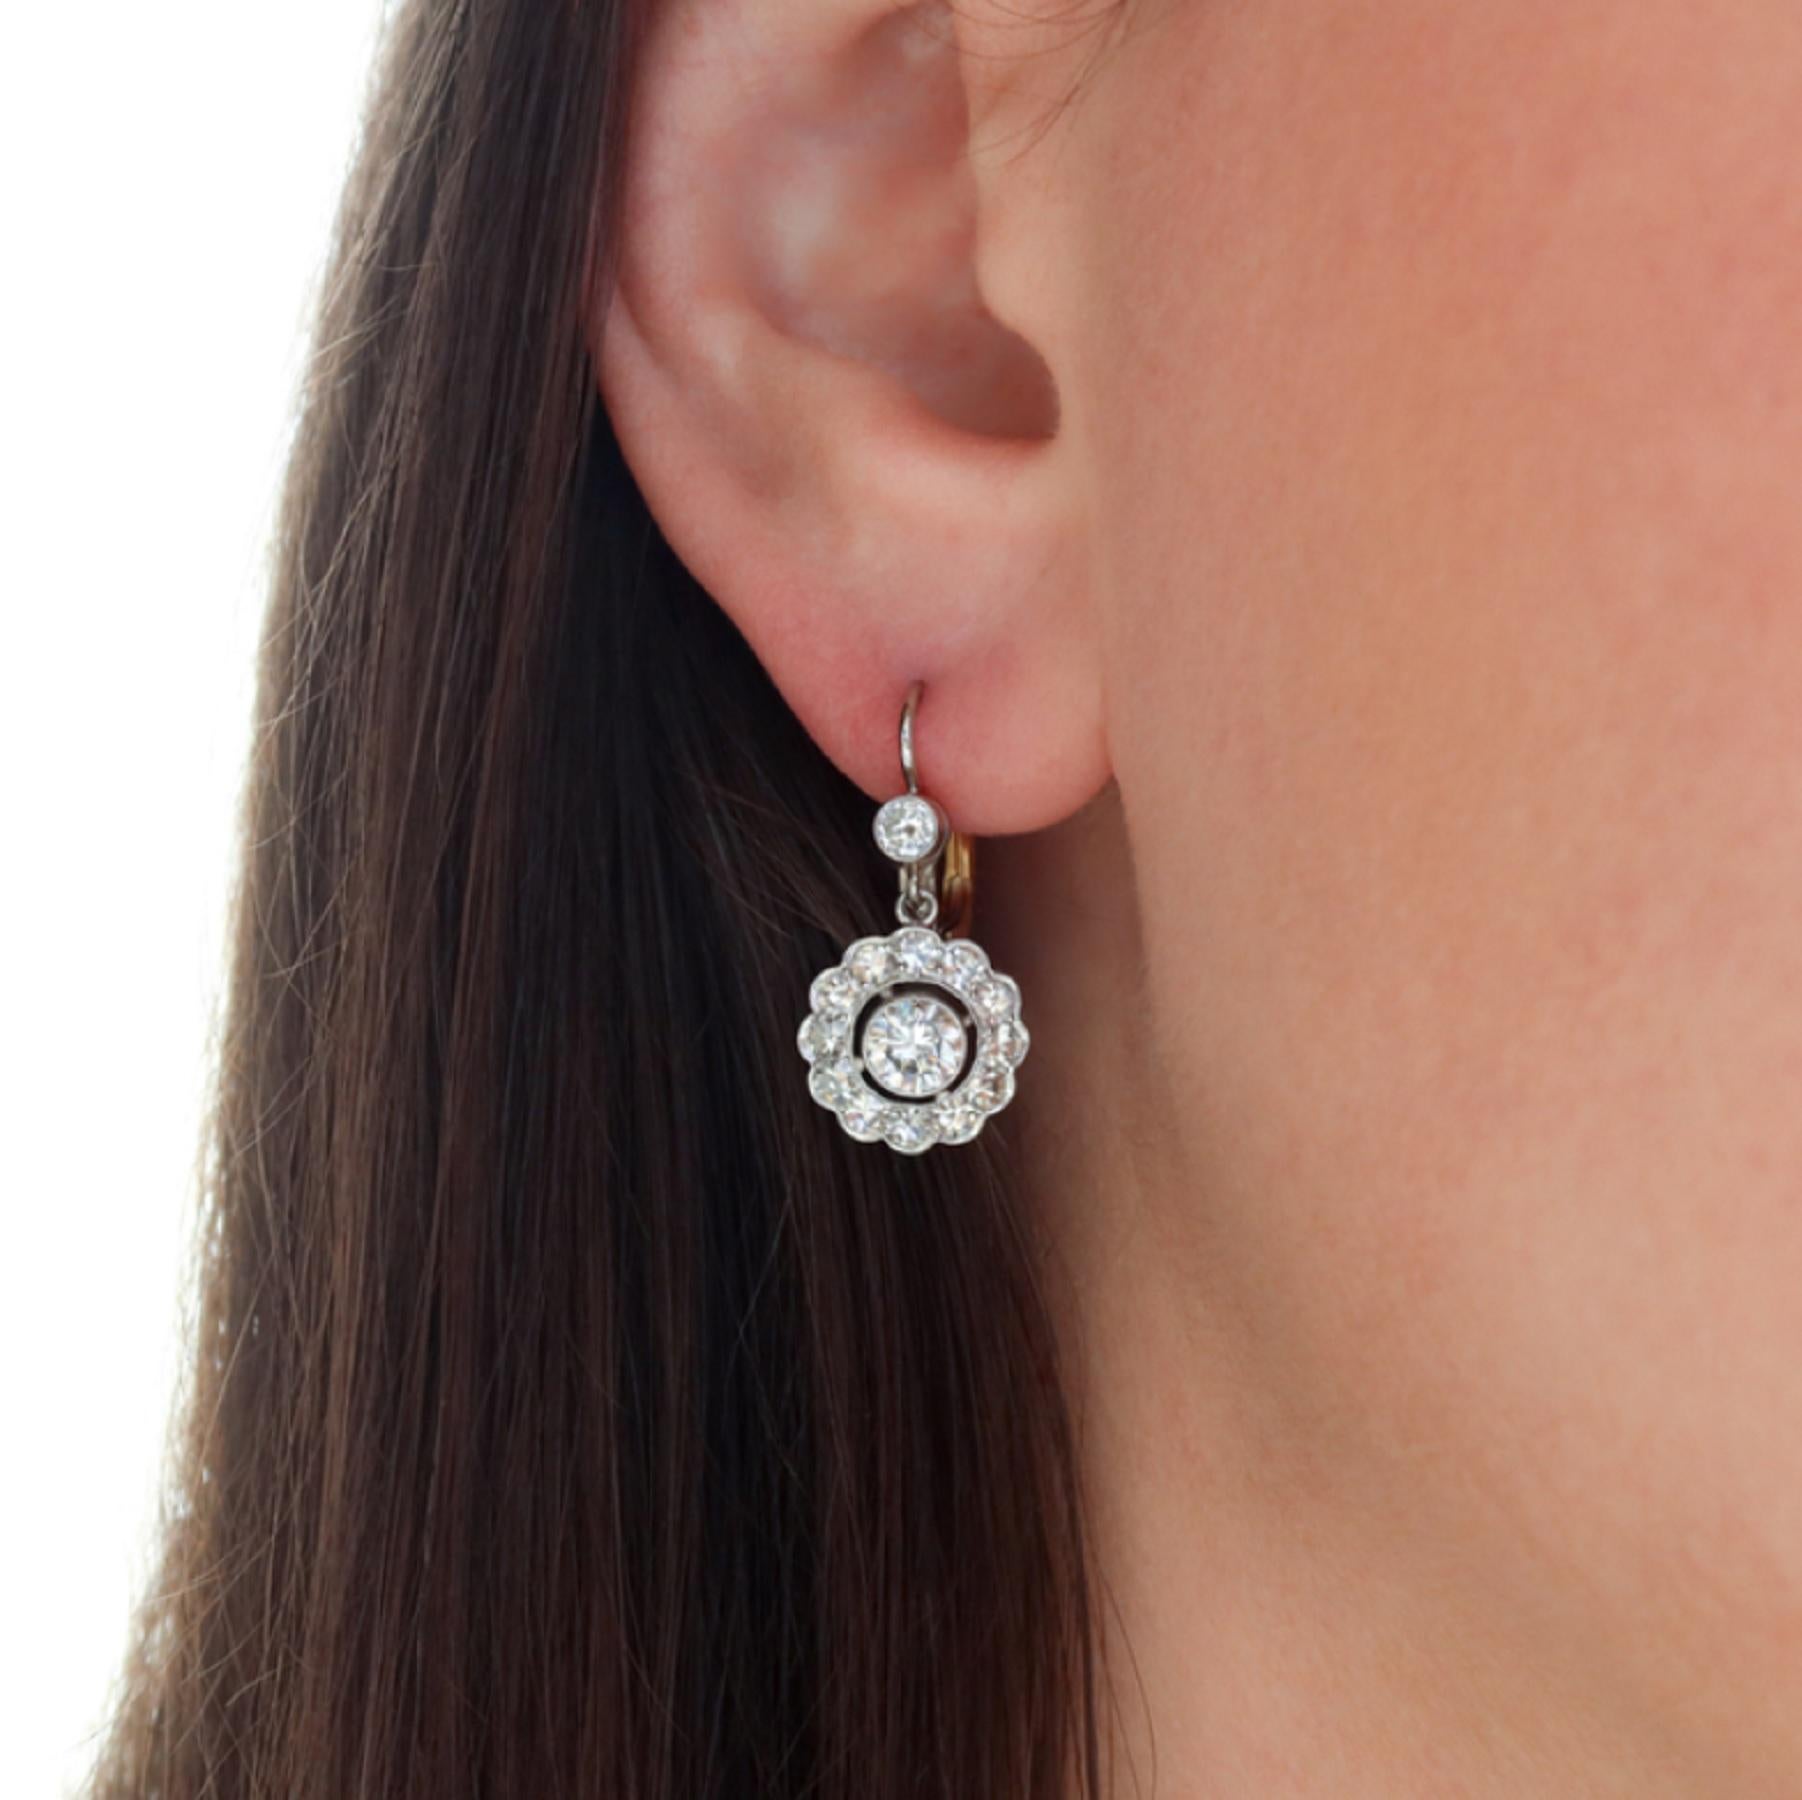  A breathtaking pair of authentic vintage dangle earrings feature two vibrant round brilliant cut diamonds surrounded by sparkling halos of high quality vintage one cut diamonds. 

Totaling 0.84 carats the two center diamonds are crisp white and